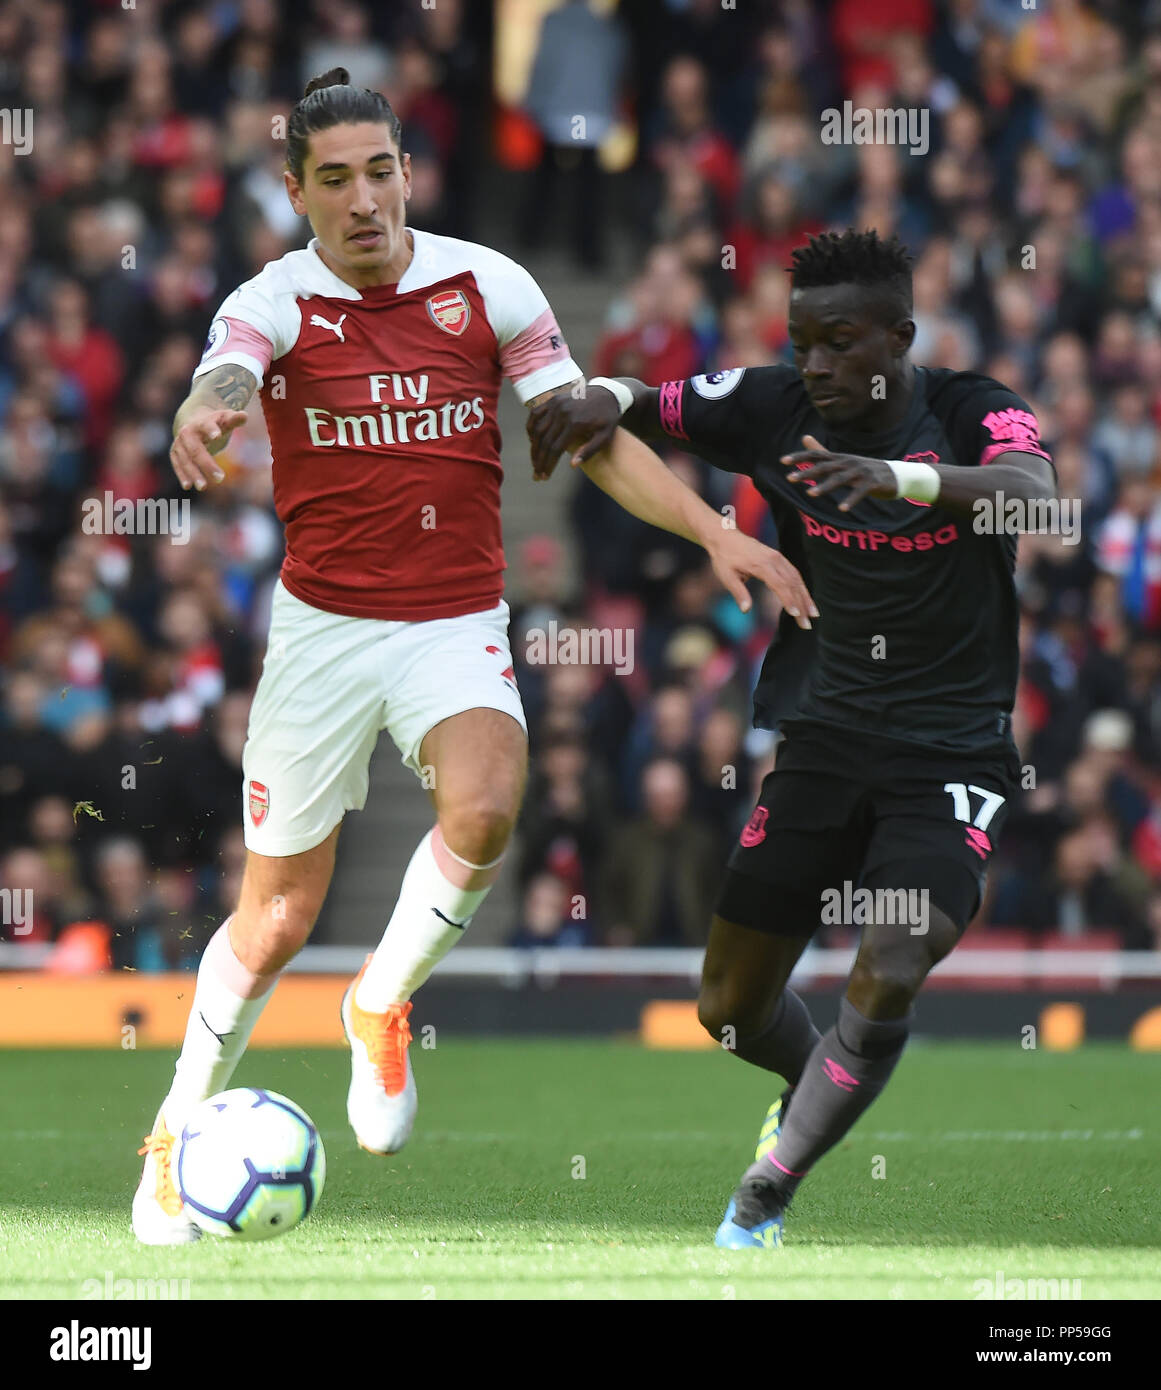 Idrissa Gueye of Everton and Hector Bellerin of Arsenal in action during the Premier League match between Arsenal and Everton at Emirates Stadium on September 23rd 2018 in London, England. (Photo by Zed Jameson/phcimages.com) Stock Photo